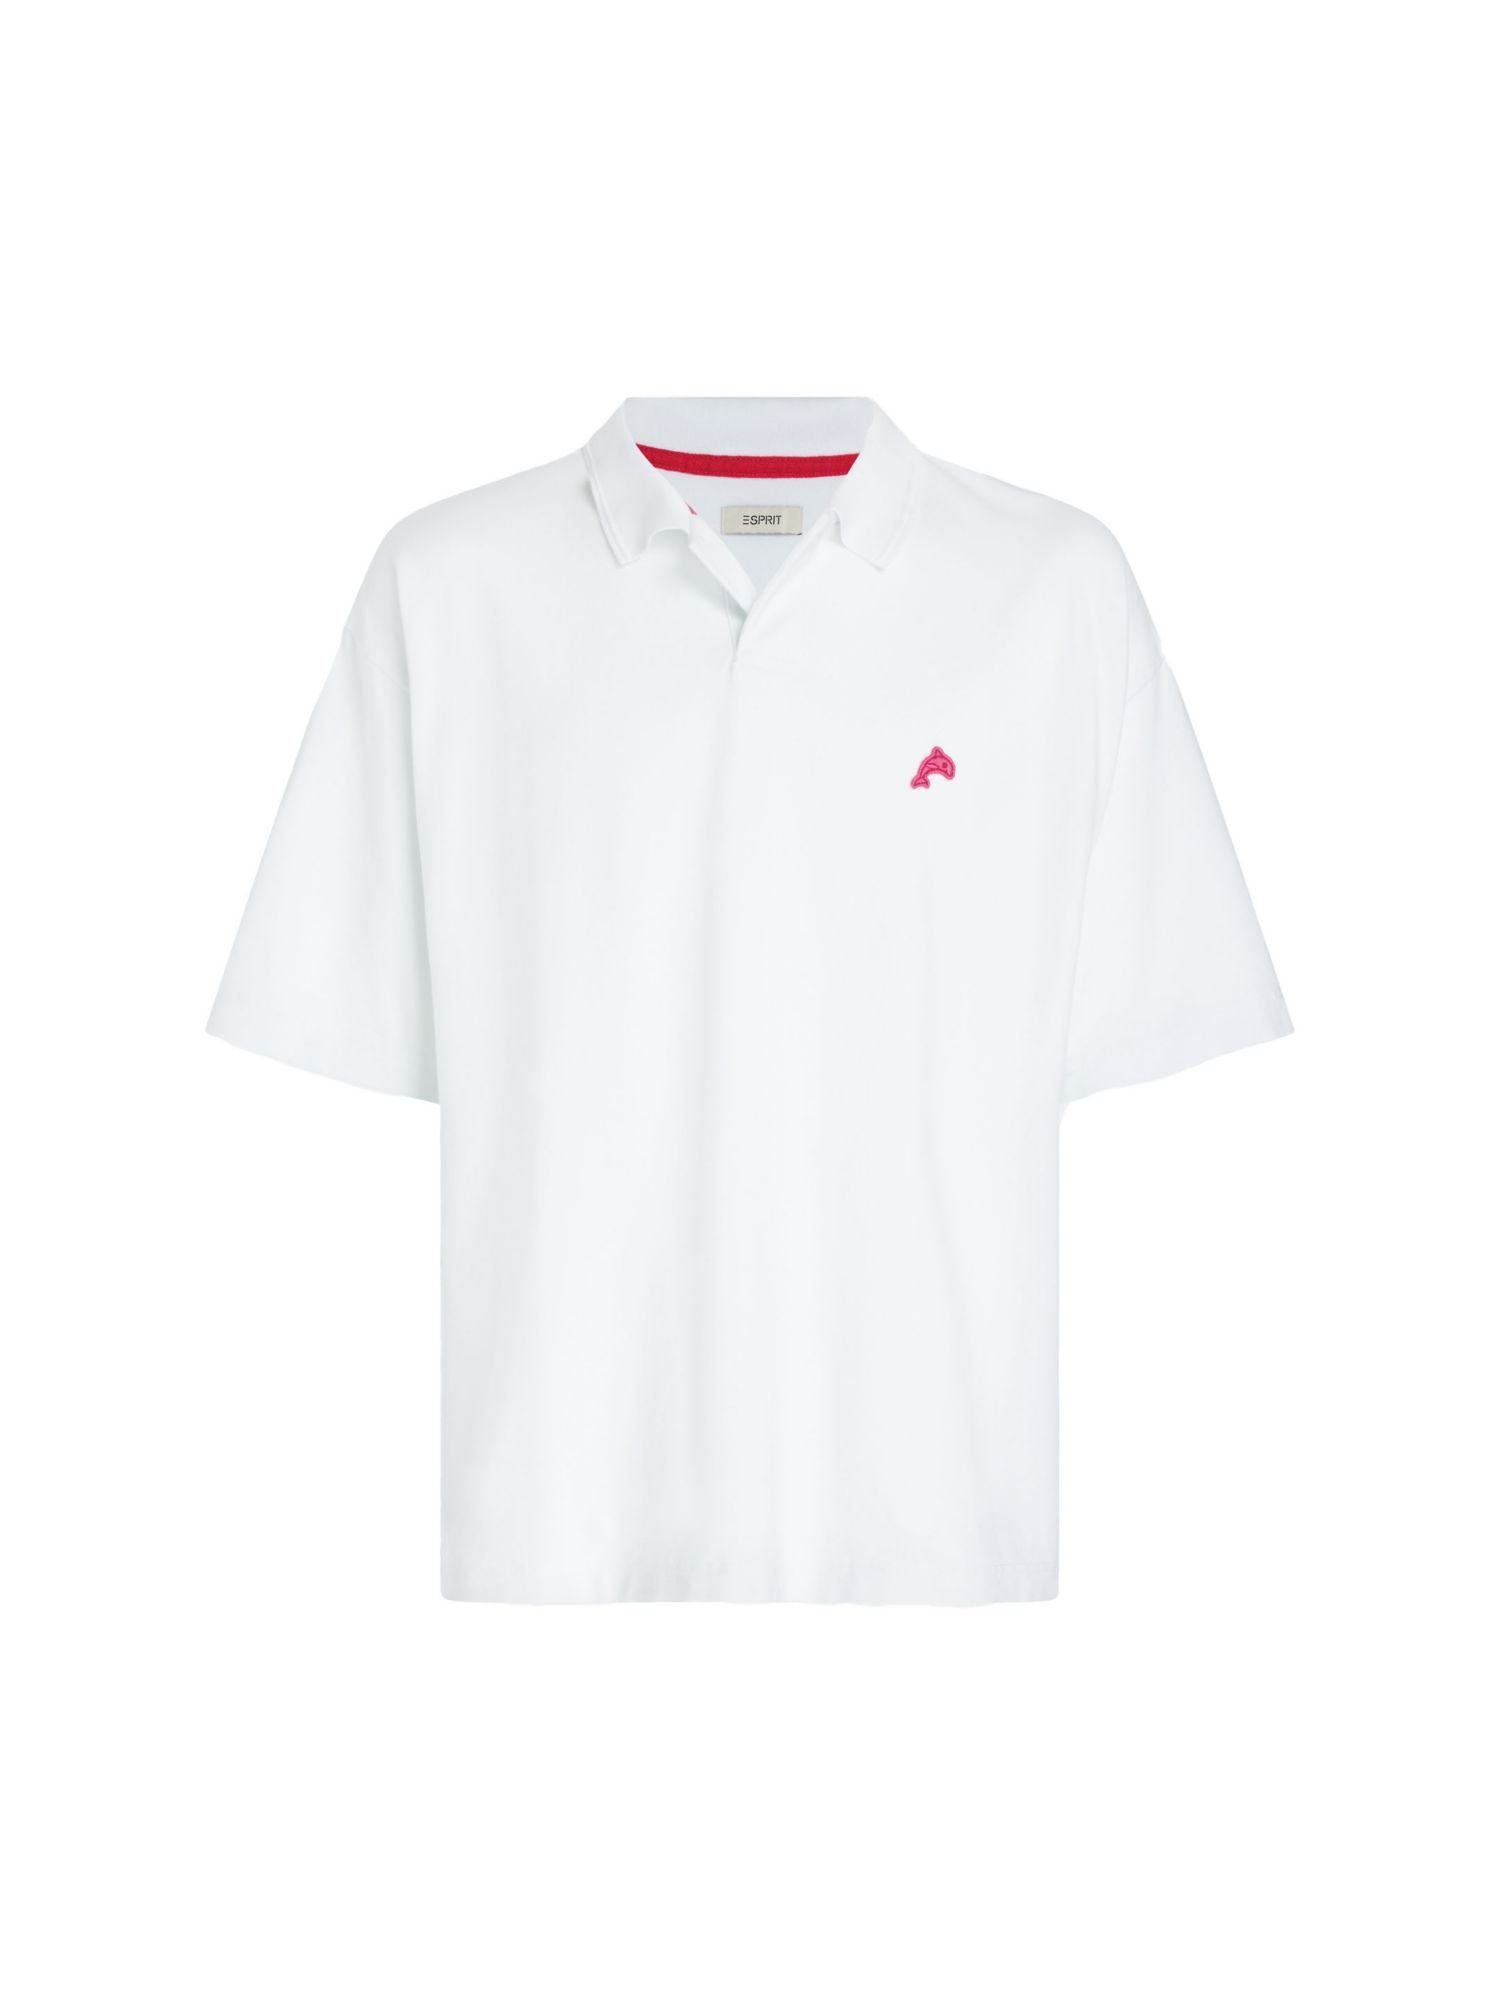 Esprit Poloshirt Relaxed Fit Poloshirt mit Dolphin-Badge WHITE